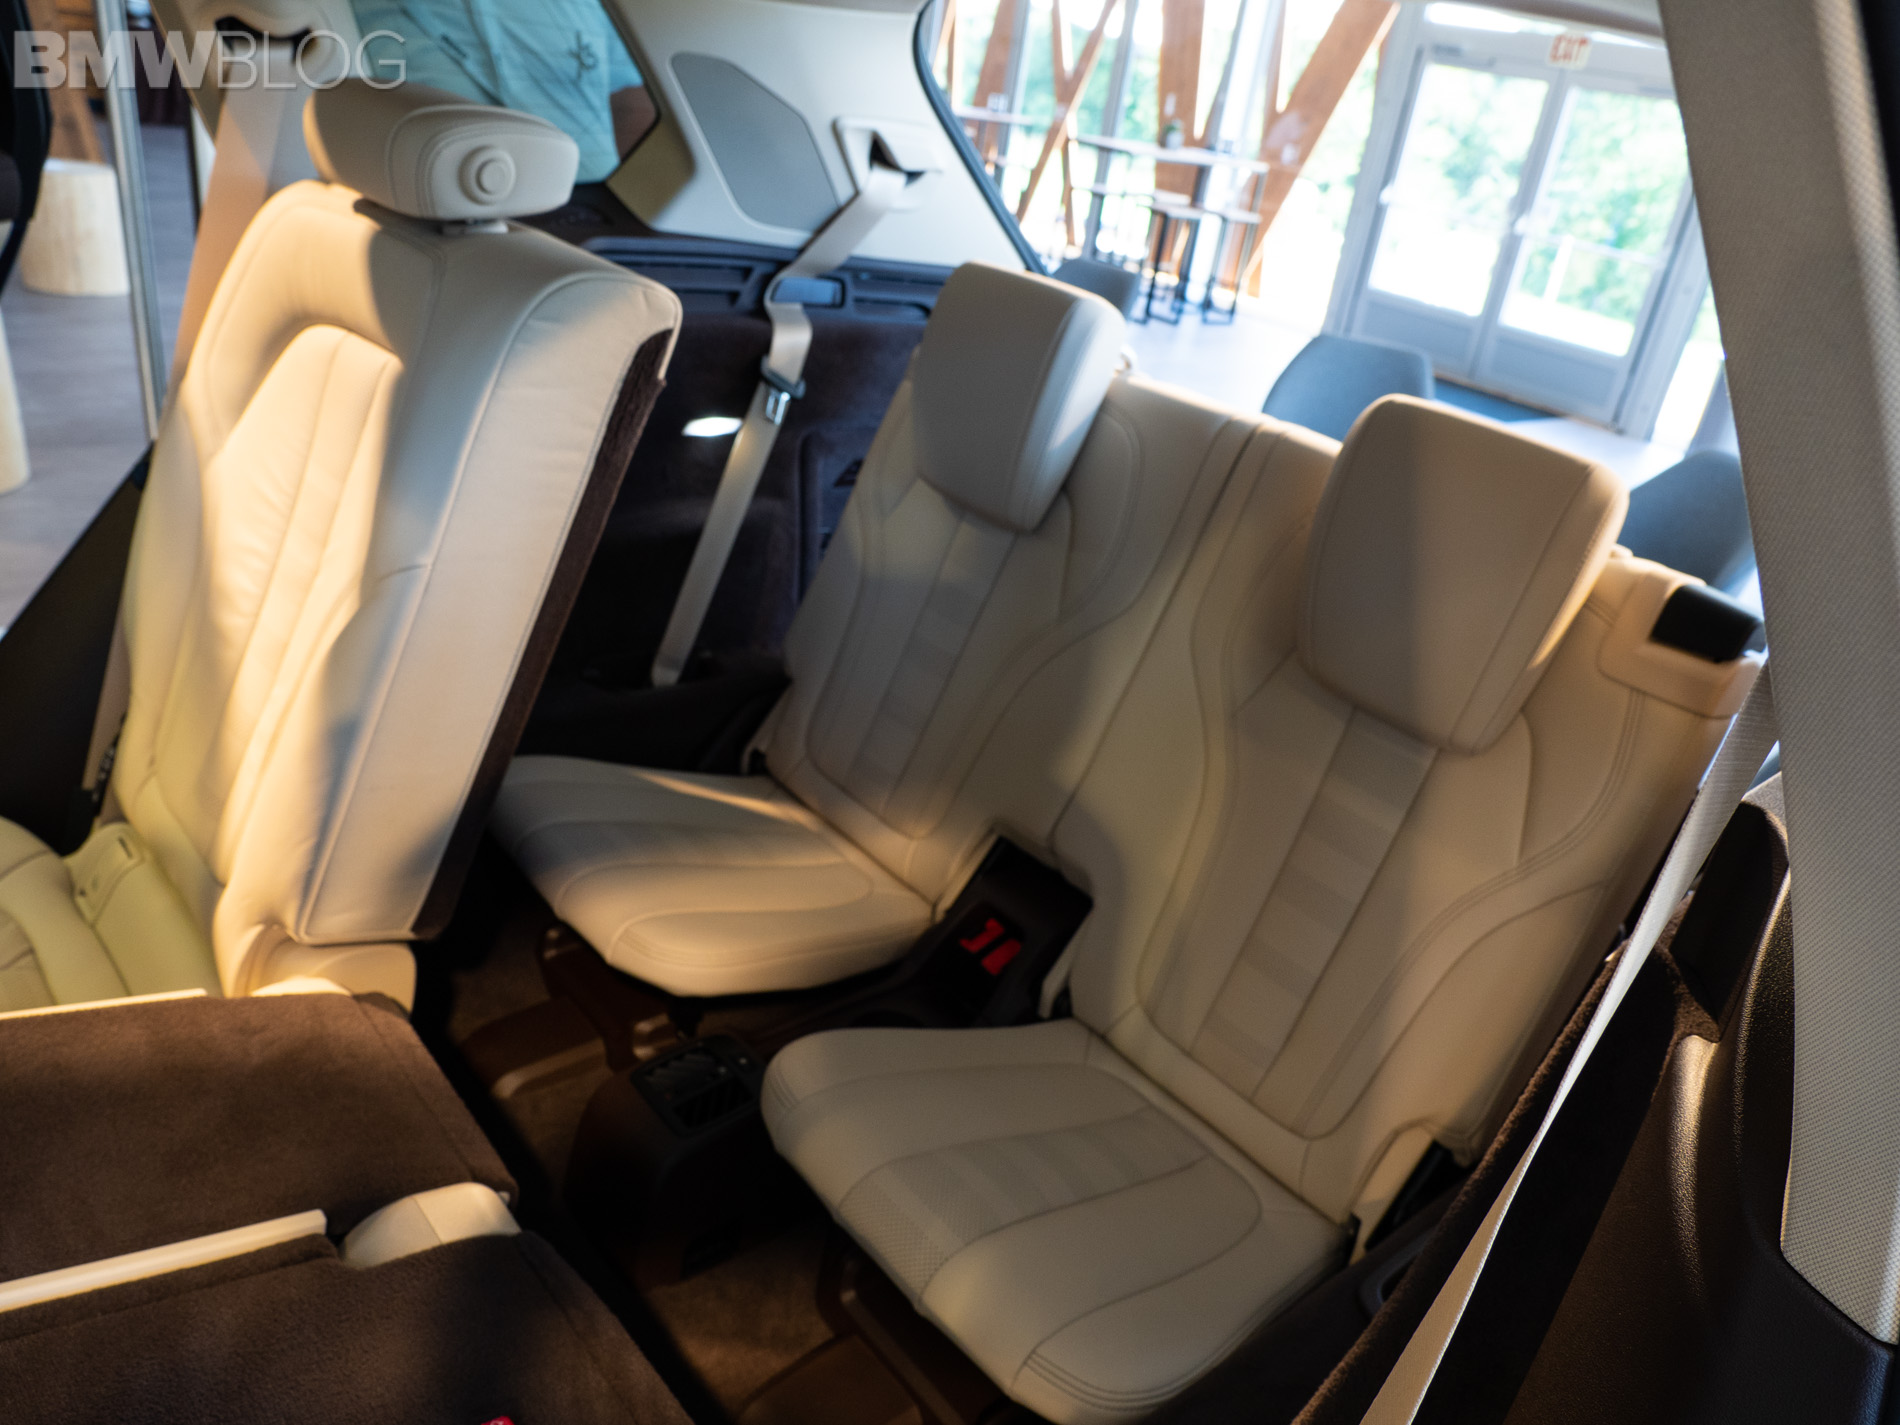 First look at the third-row seat in the new BMW X5